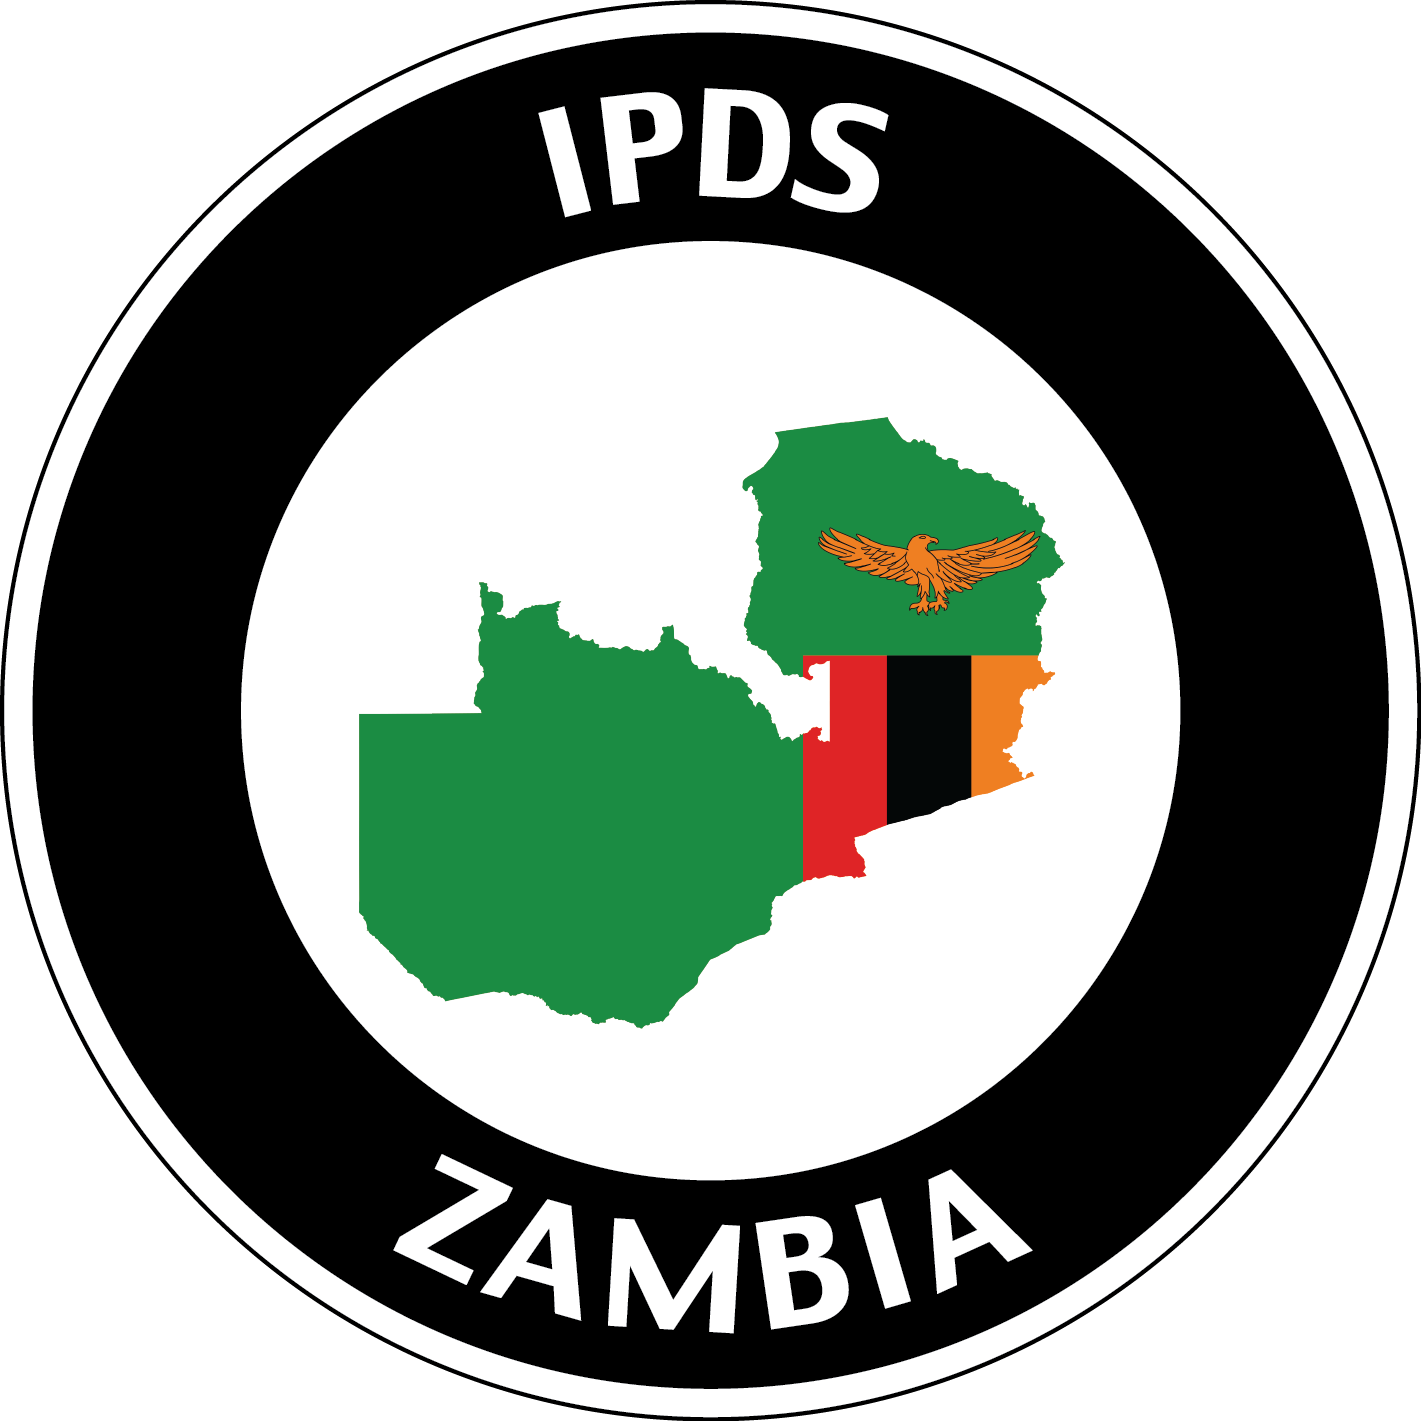 Welcome to Zambia logo with country and flag